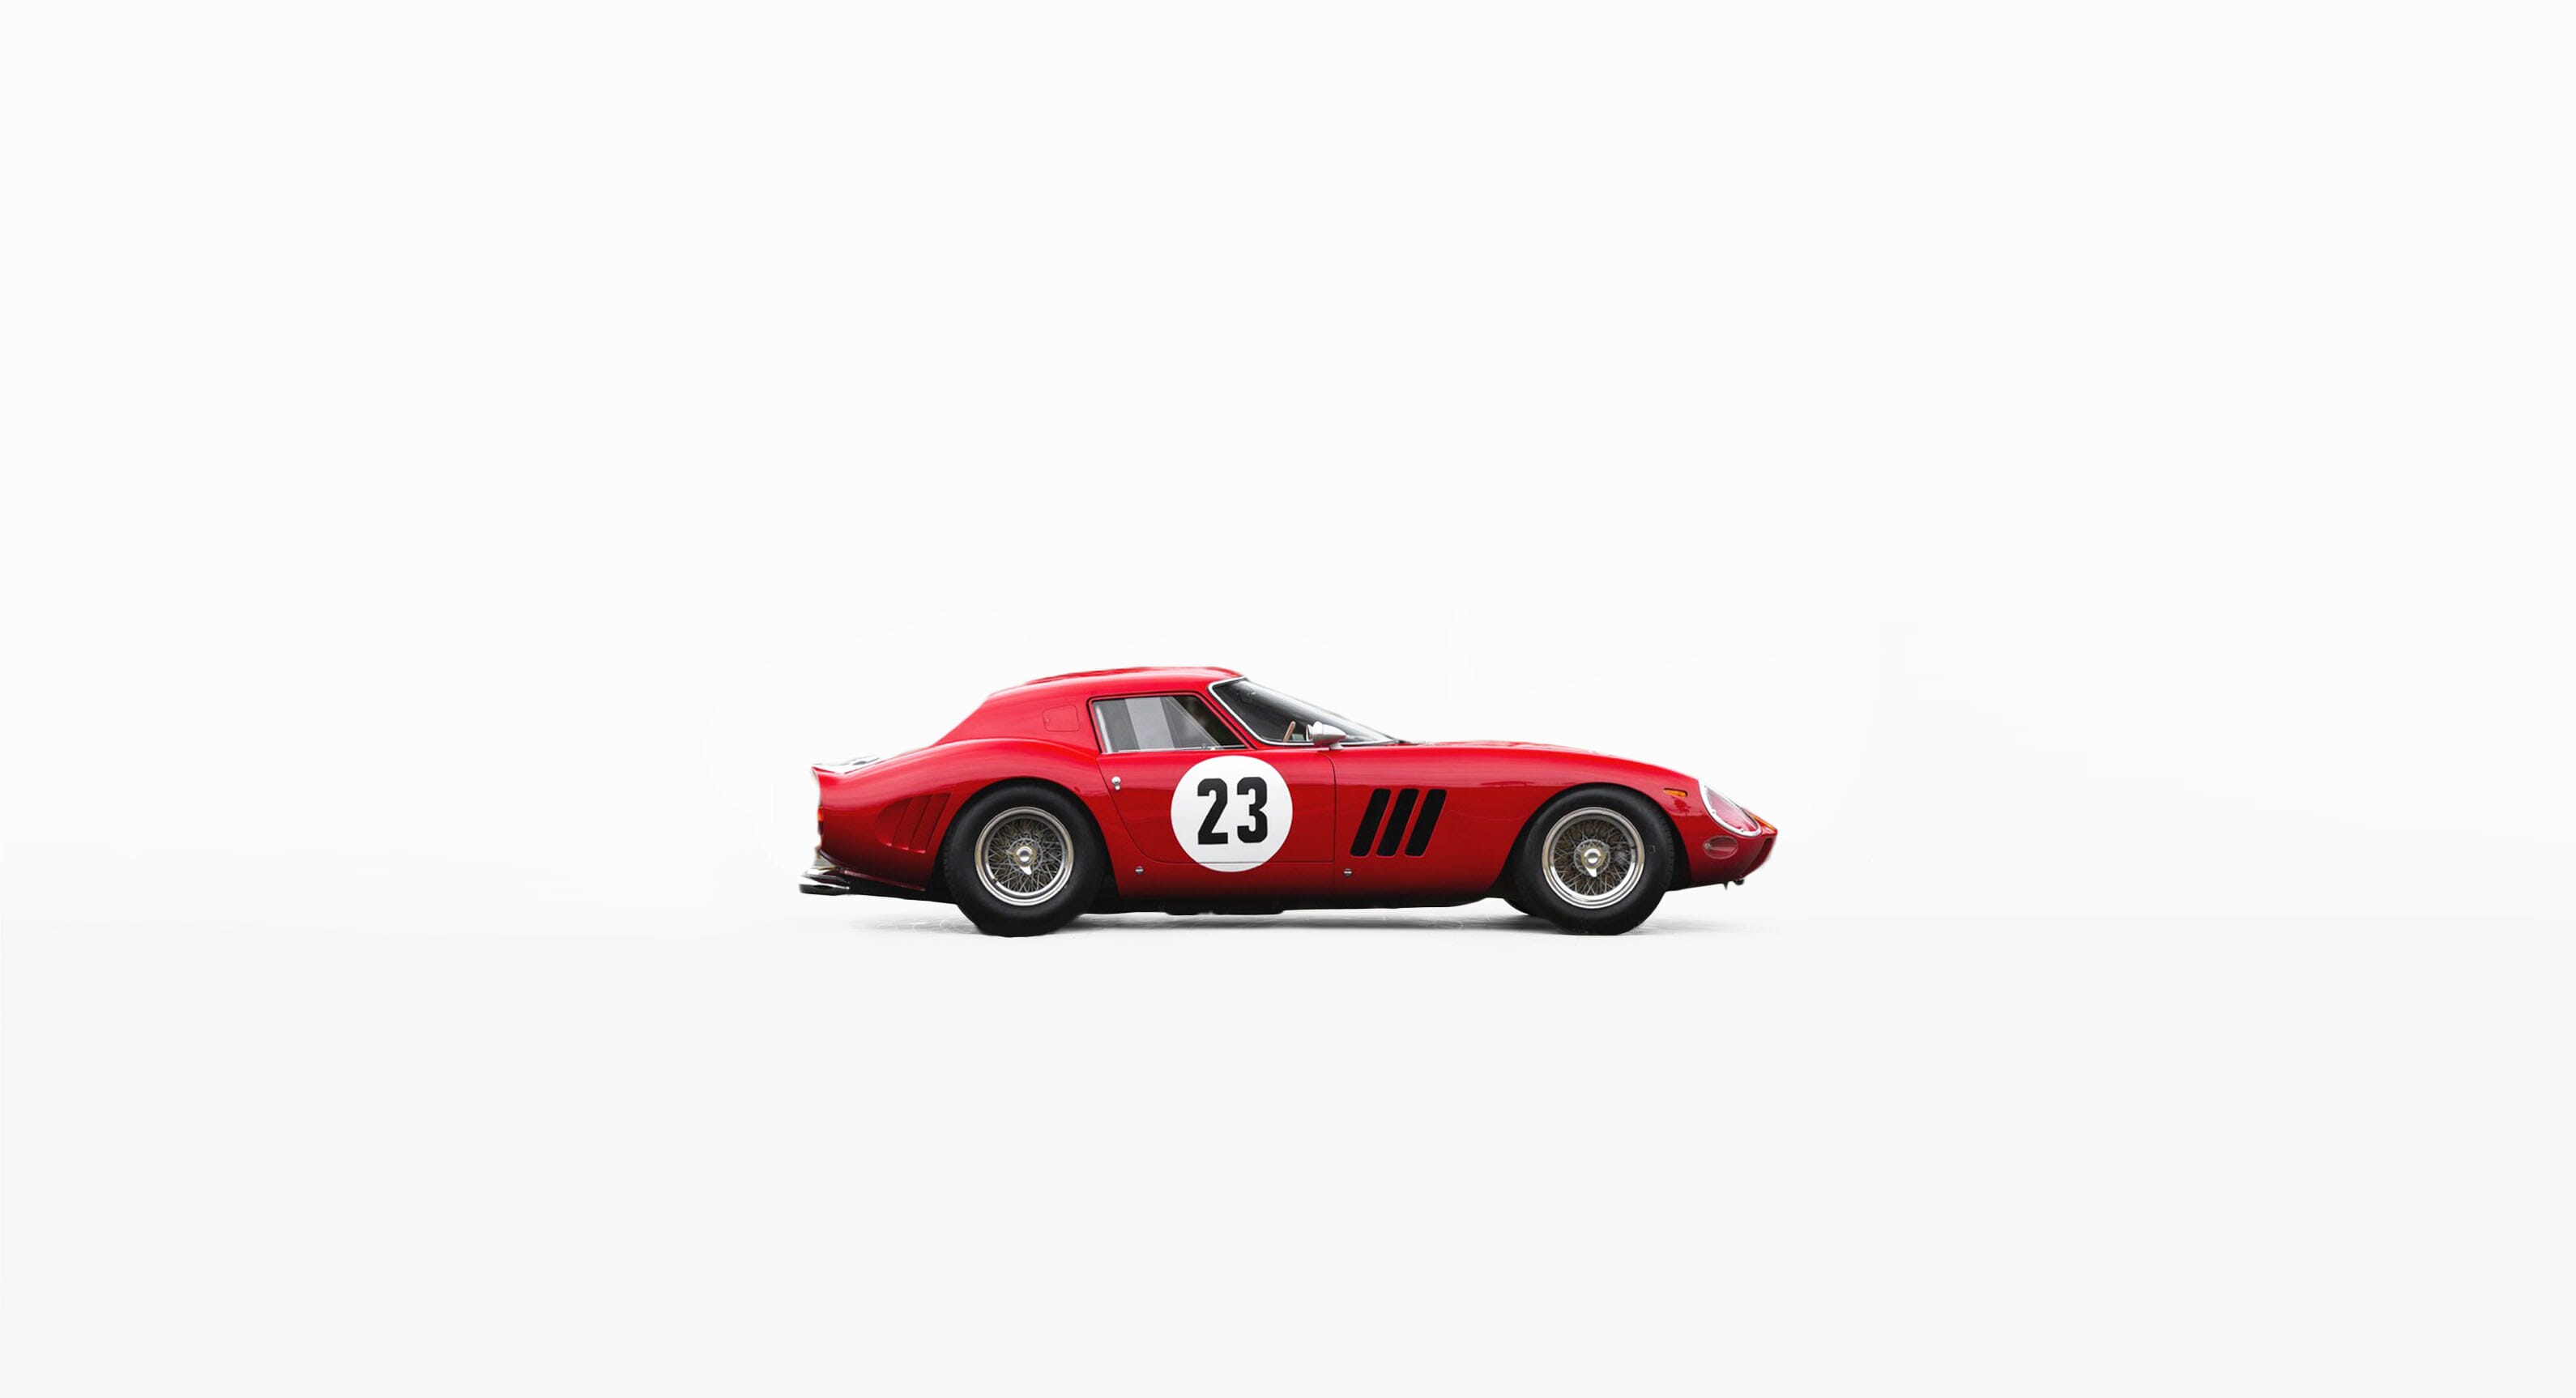 Could This Ferrari 250 Become The Most Expensive Car Ever Auctioned?